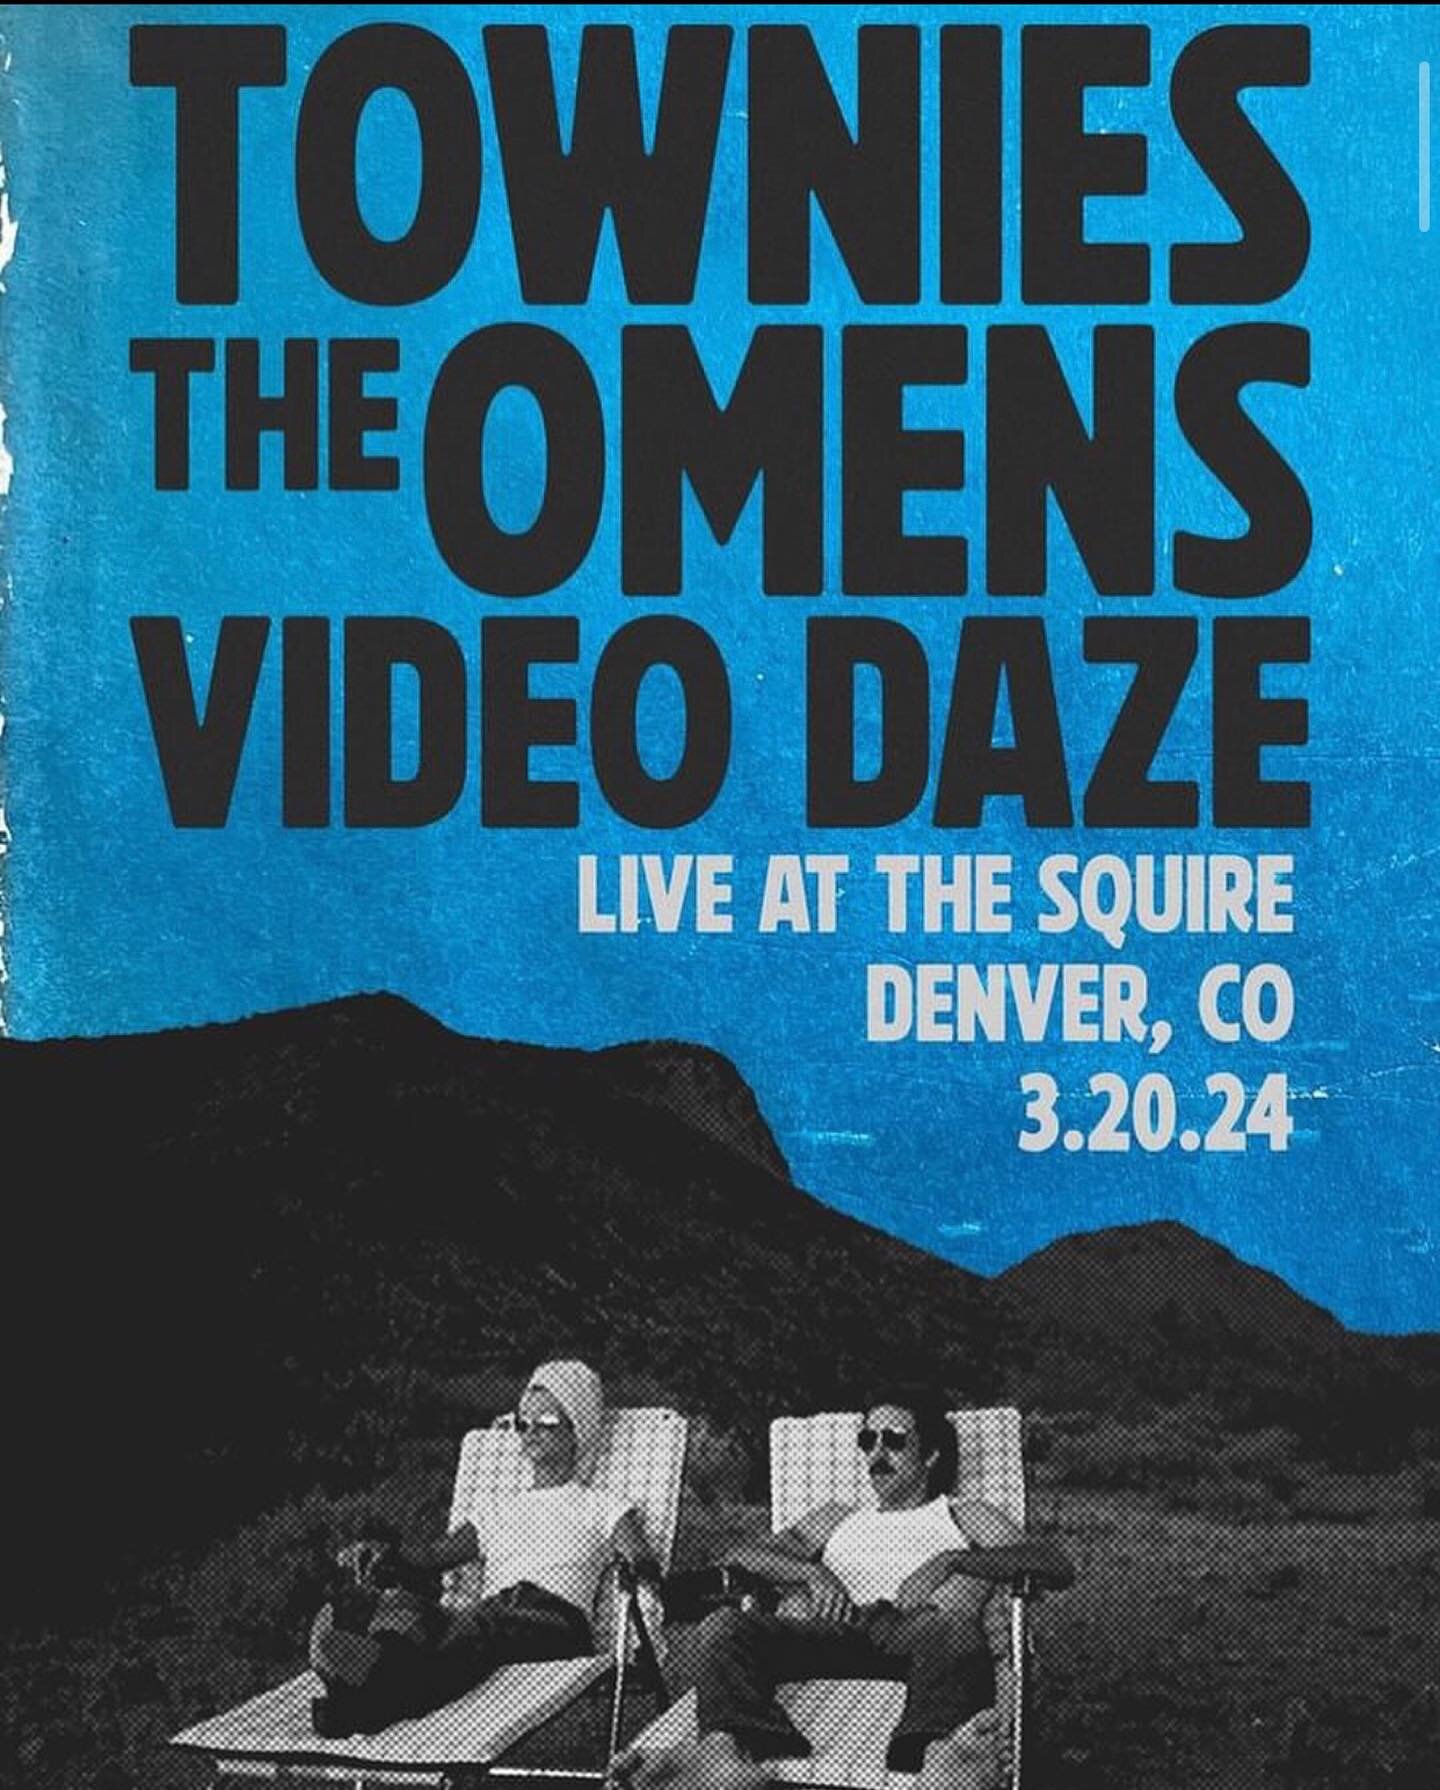 Live at Squire, @ohnoitstownies @video_daze_band 3.20.24 10pm doors $10 covers 21+ @squirecolfaxdenver 

#squireloungedenver #colfaxbars #coldfax #colfaxlove #colfaxmusic #comepartywithus #squirelounge #squireloungecolfax #denverdivebars